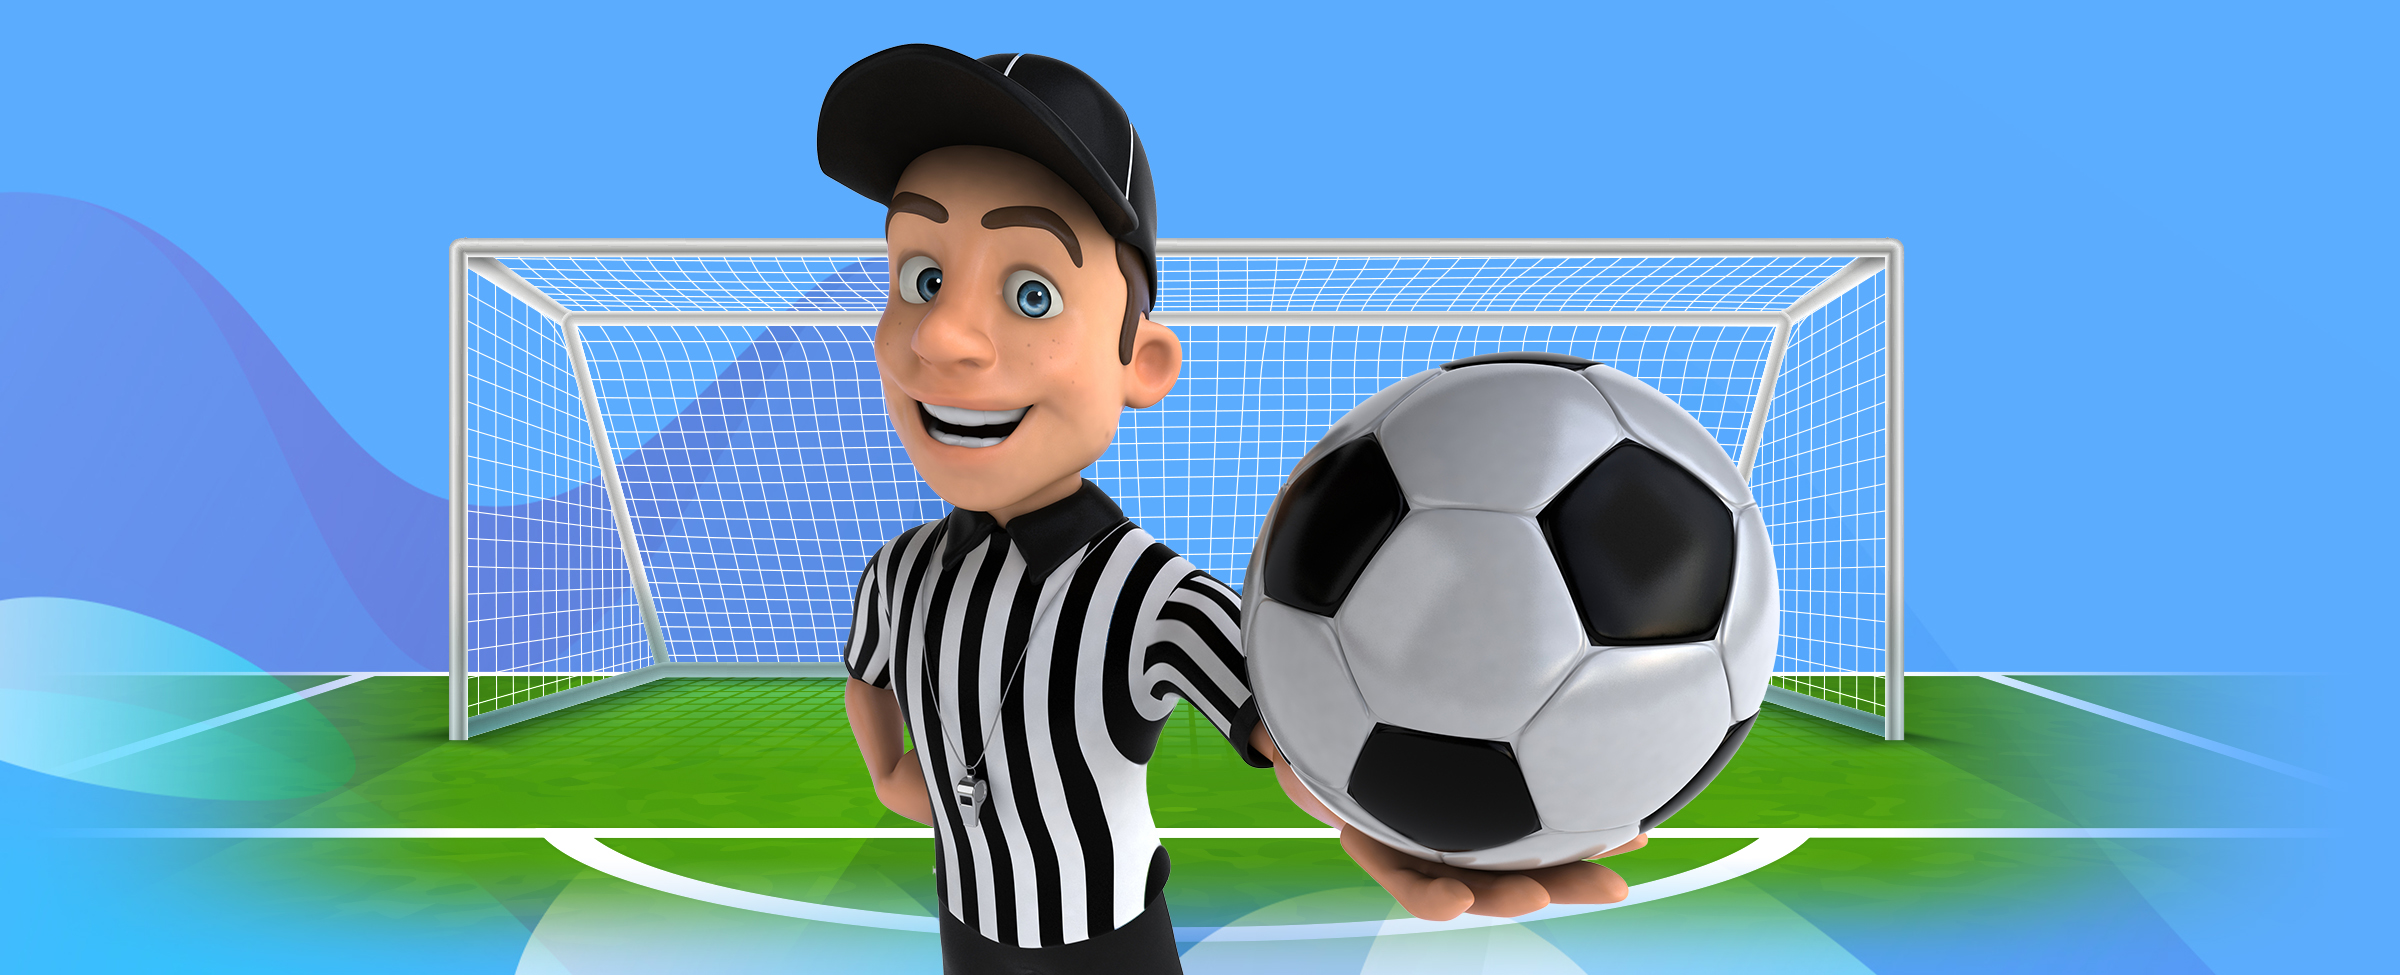 World Cup Football is calling your name – it’s time to hit the field and go head-to-head for the win in this action-packed slot game at SlotsLV.